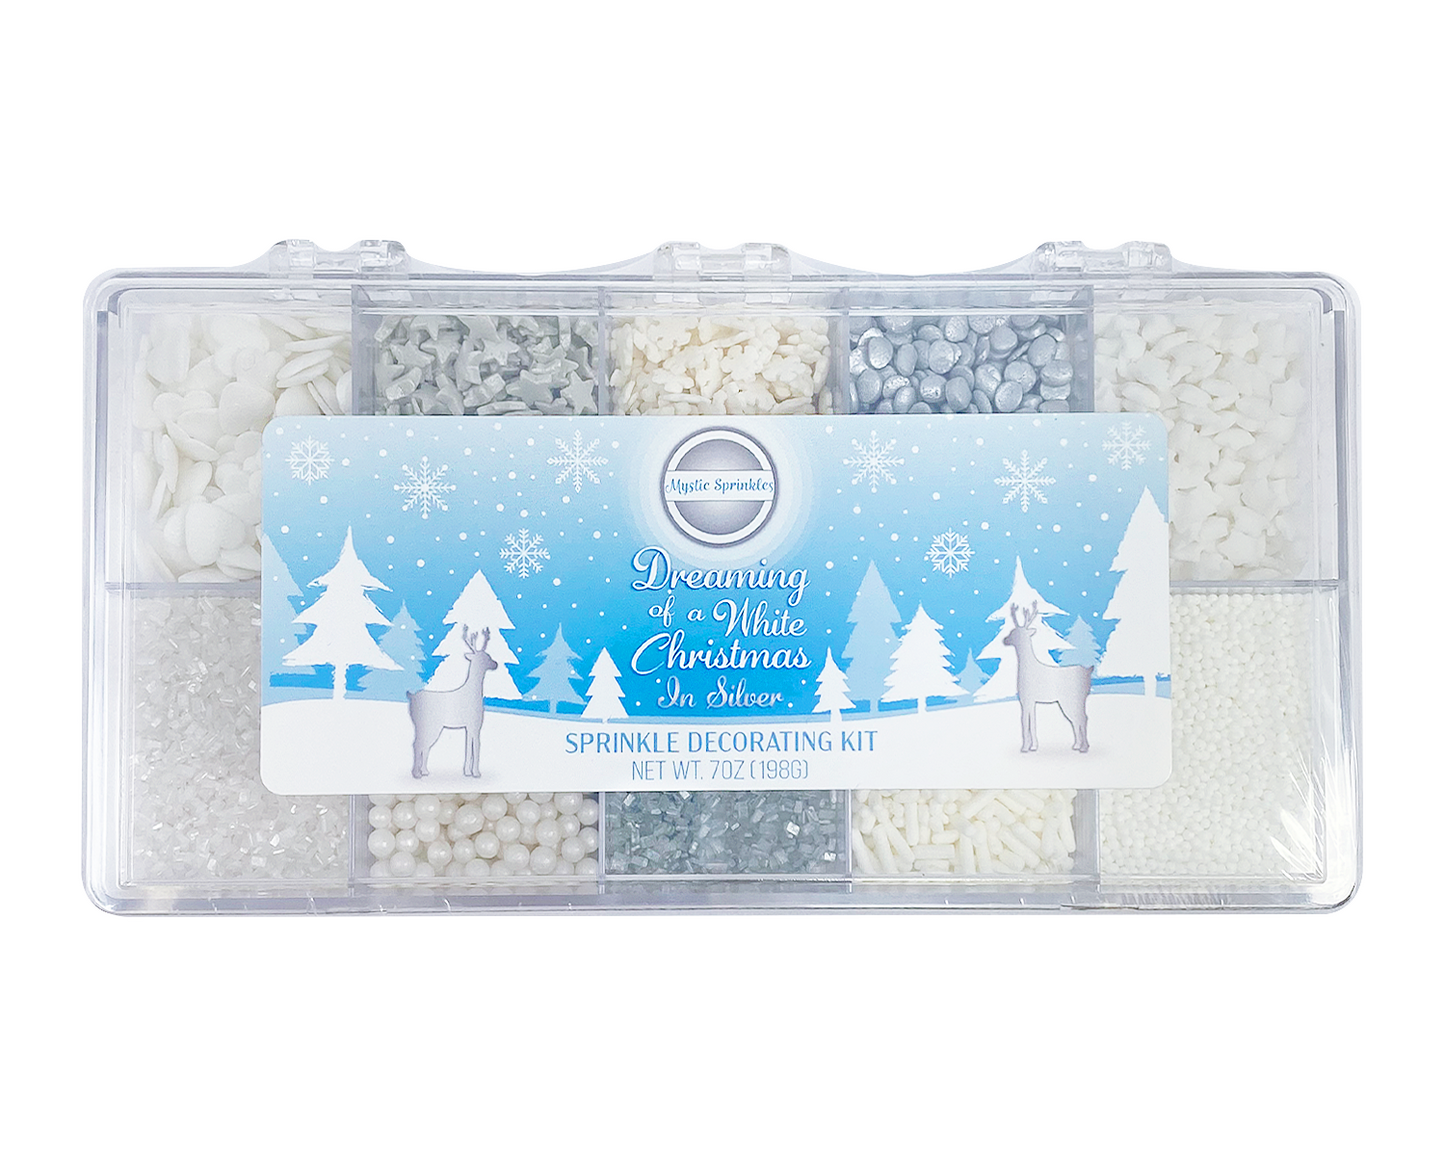 Dreaming of a White Christmas in Silver Sprinkle Decorating Kit 7oz